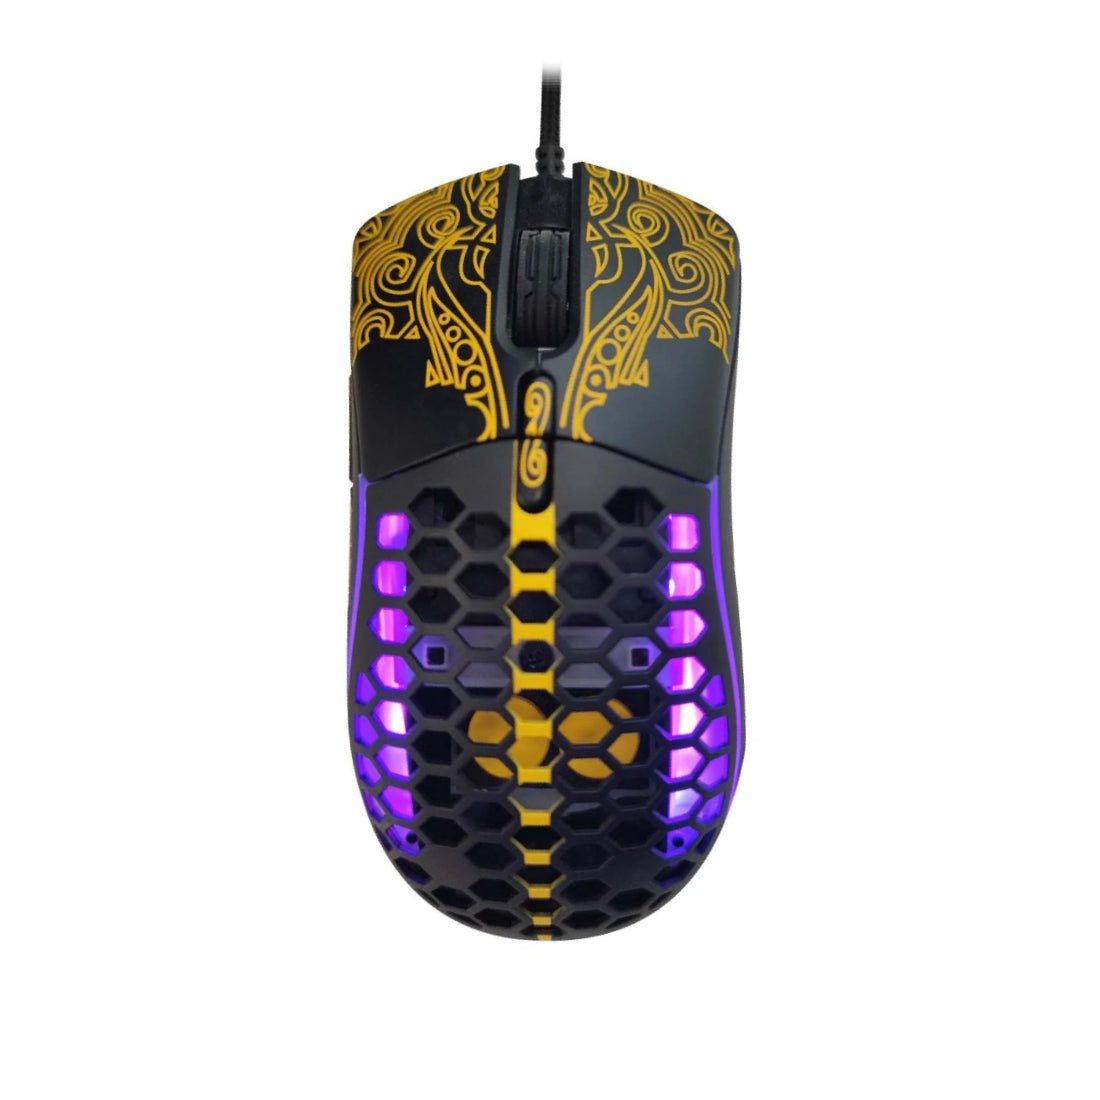 Twisted Minds CoolKnight RGB Wired Gaming Mouse - Black - فأرة - Store 974 | ستور ٩٧٤